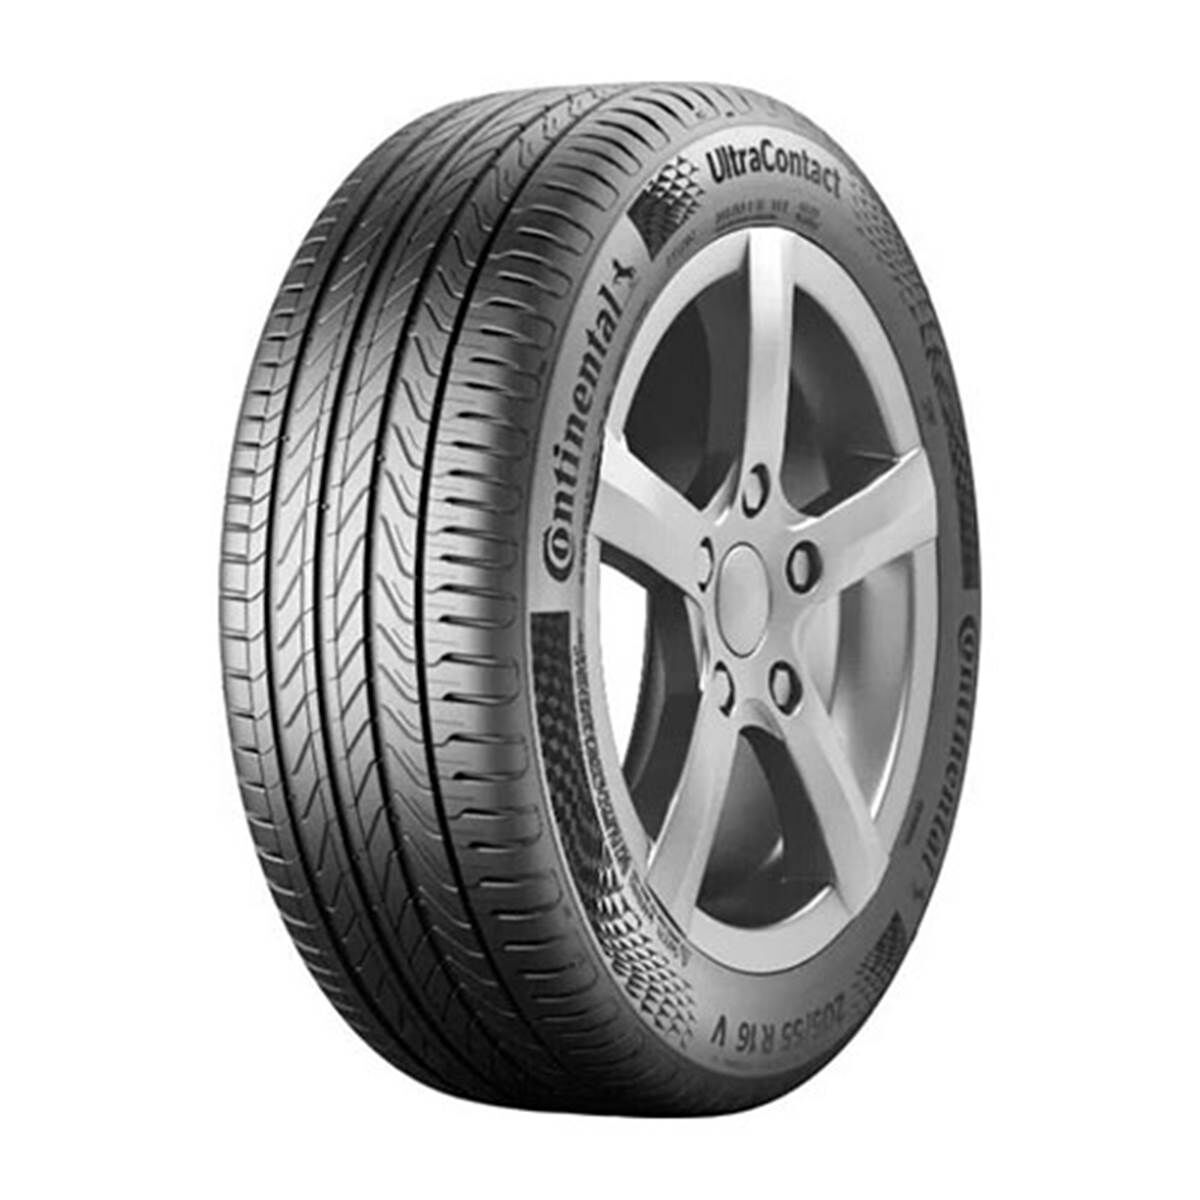 Continental Neumático  Ultracontact 185/60R15 84T